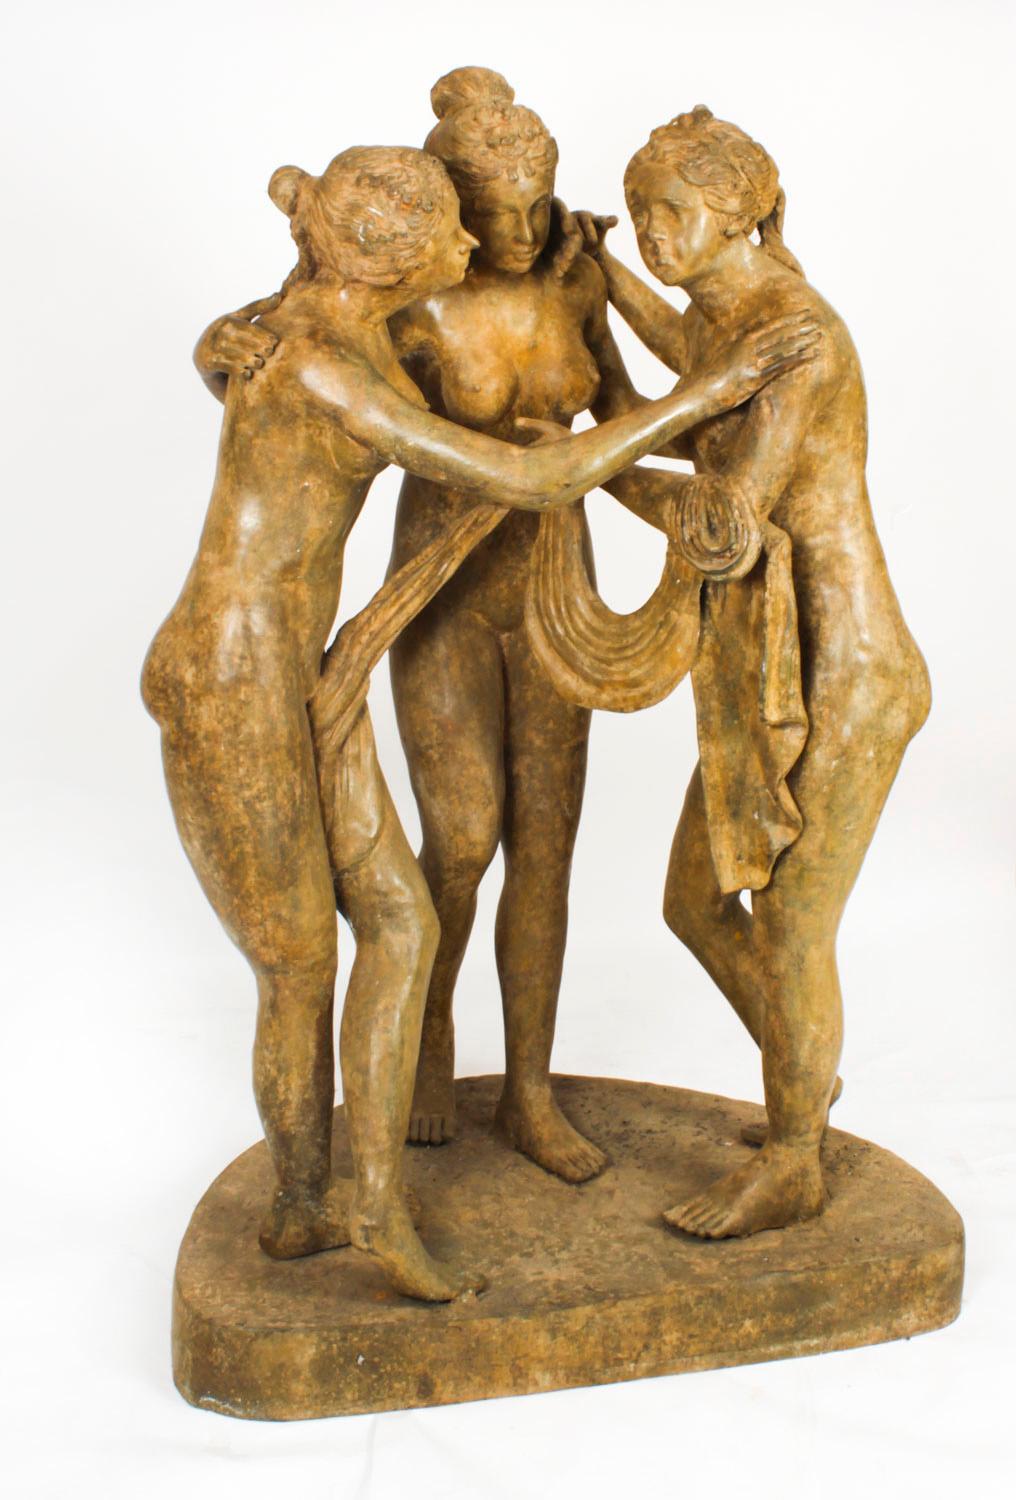 A beautiful lifesize bronze sculpture of The Three Graces, after Canova and dating from the late 20th C.

This sculpture was beautifully hotcast in solid bronze and has a striking Verdigris patinaton.

The style of this sculpture is elegant and